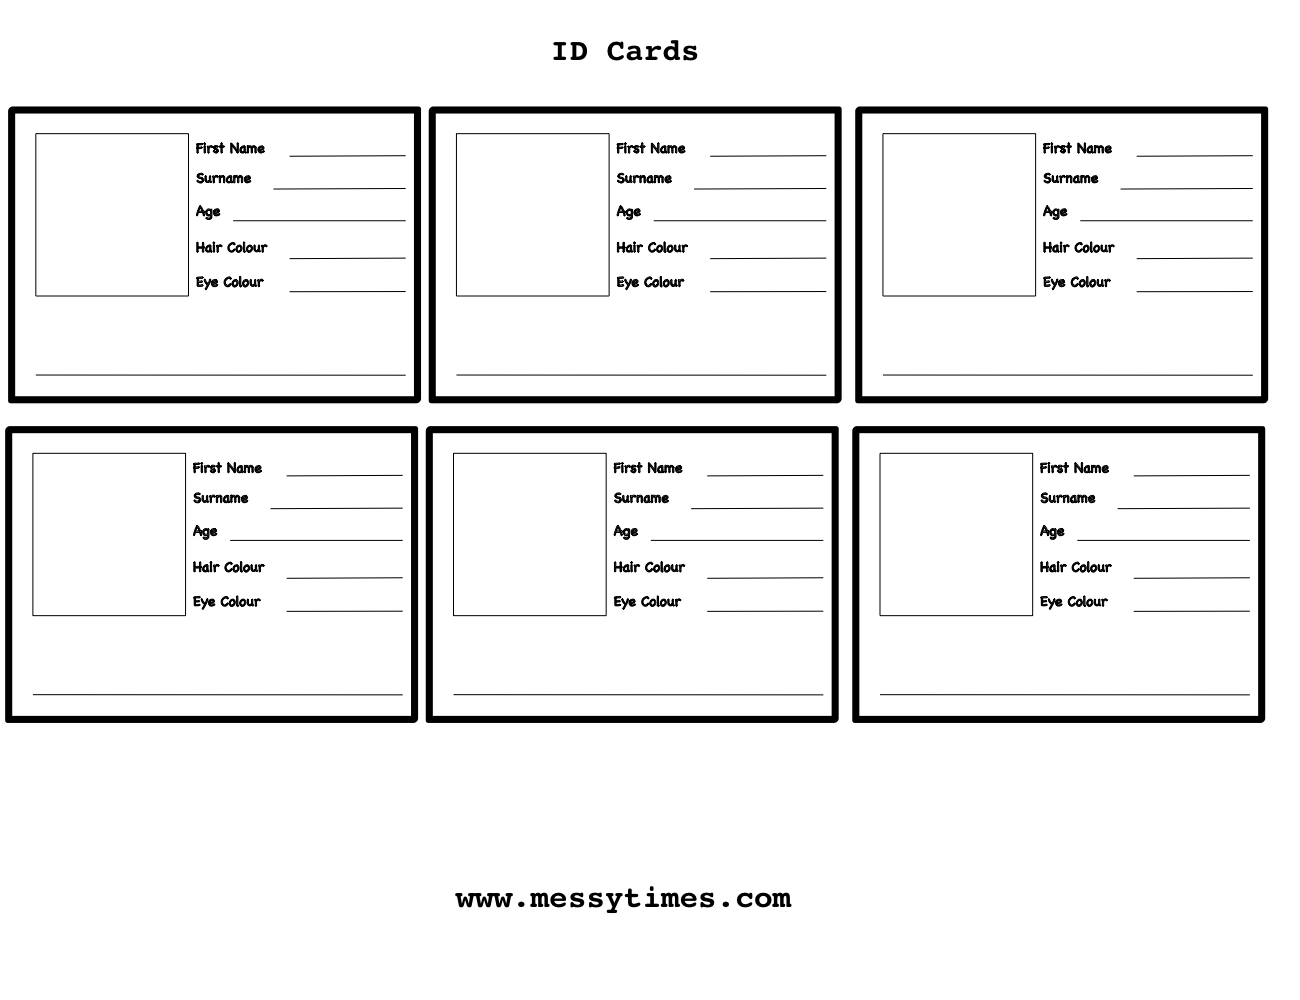 010 Template Ideas Free Printable Id Cards Templates Image Gallery - Free Printable Id Cards Templates